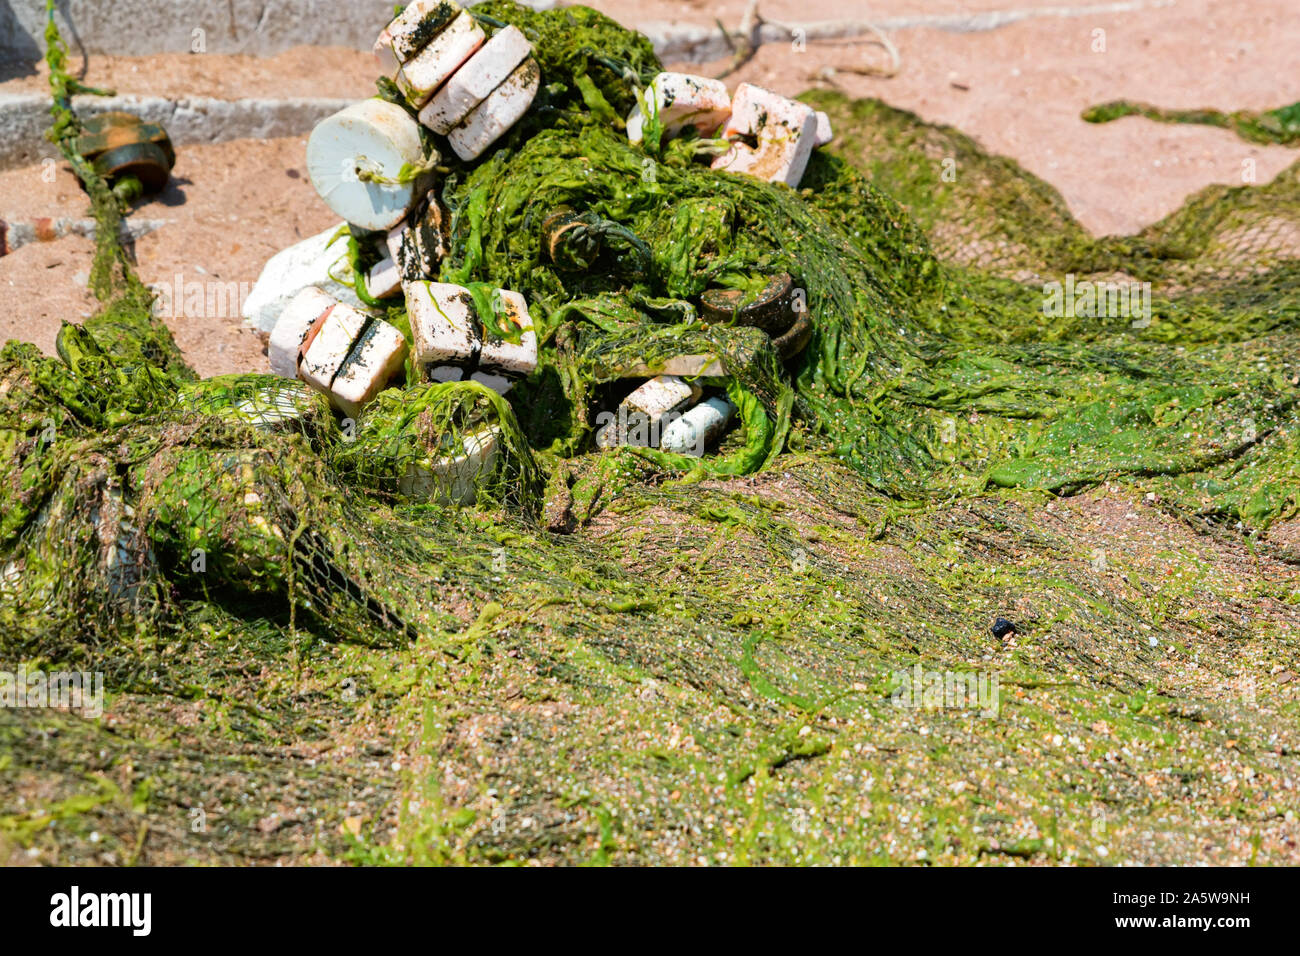 View of old fishing net full of green ooze or seaweed on sandy bank Stock Photo